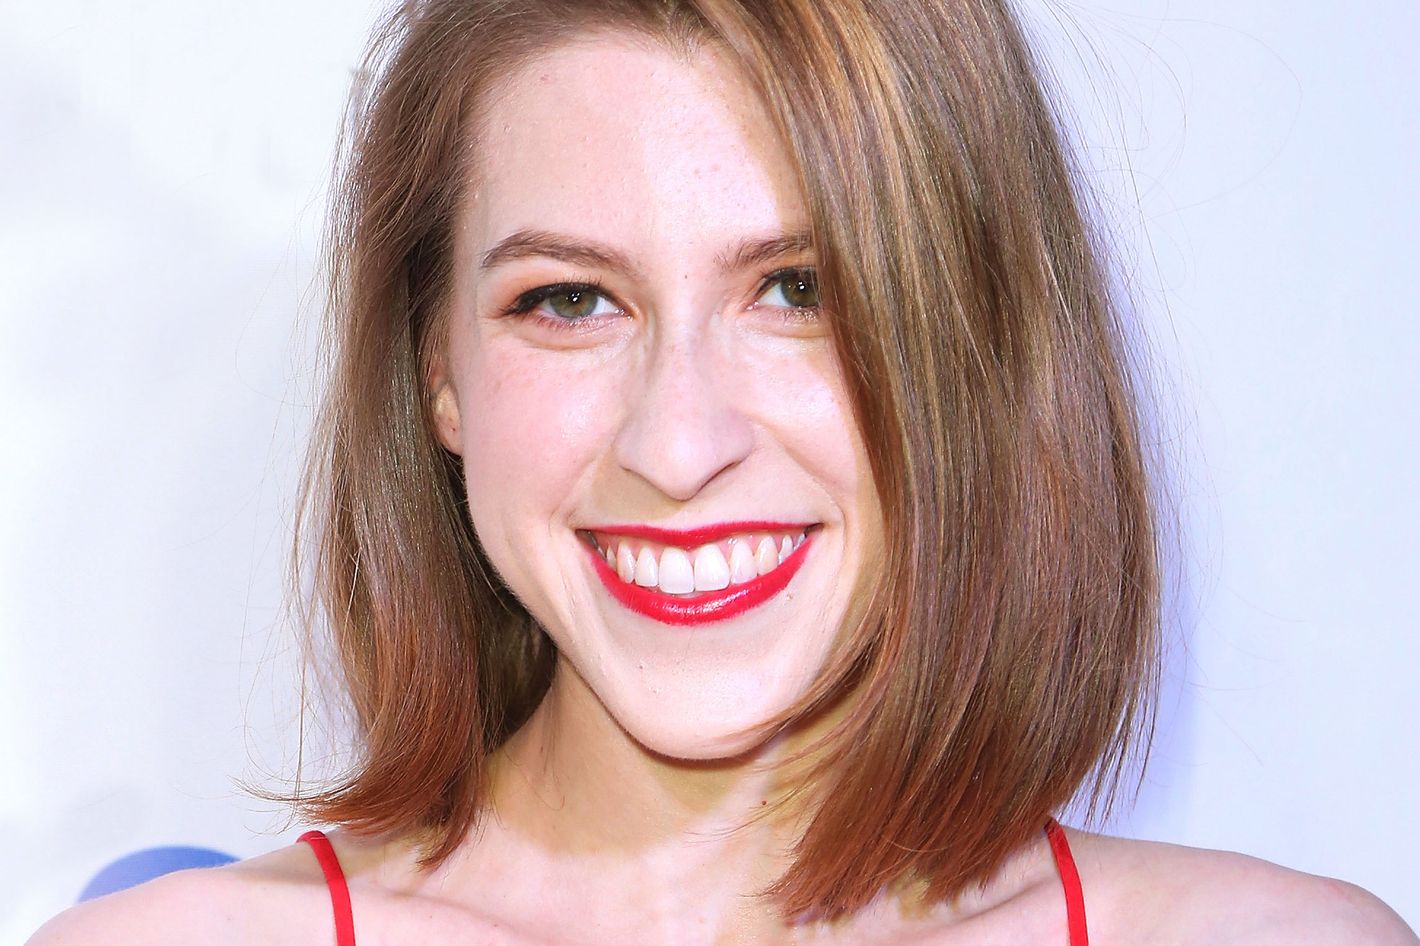 alex tadeo recommends eden sher sex pic